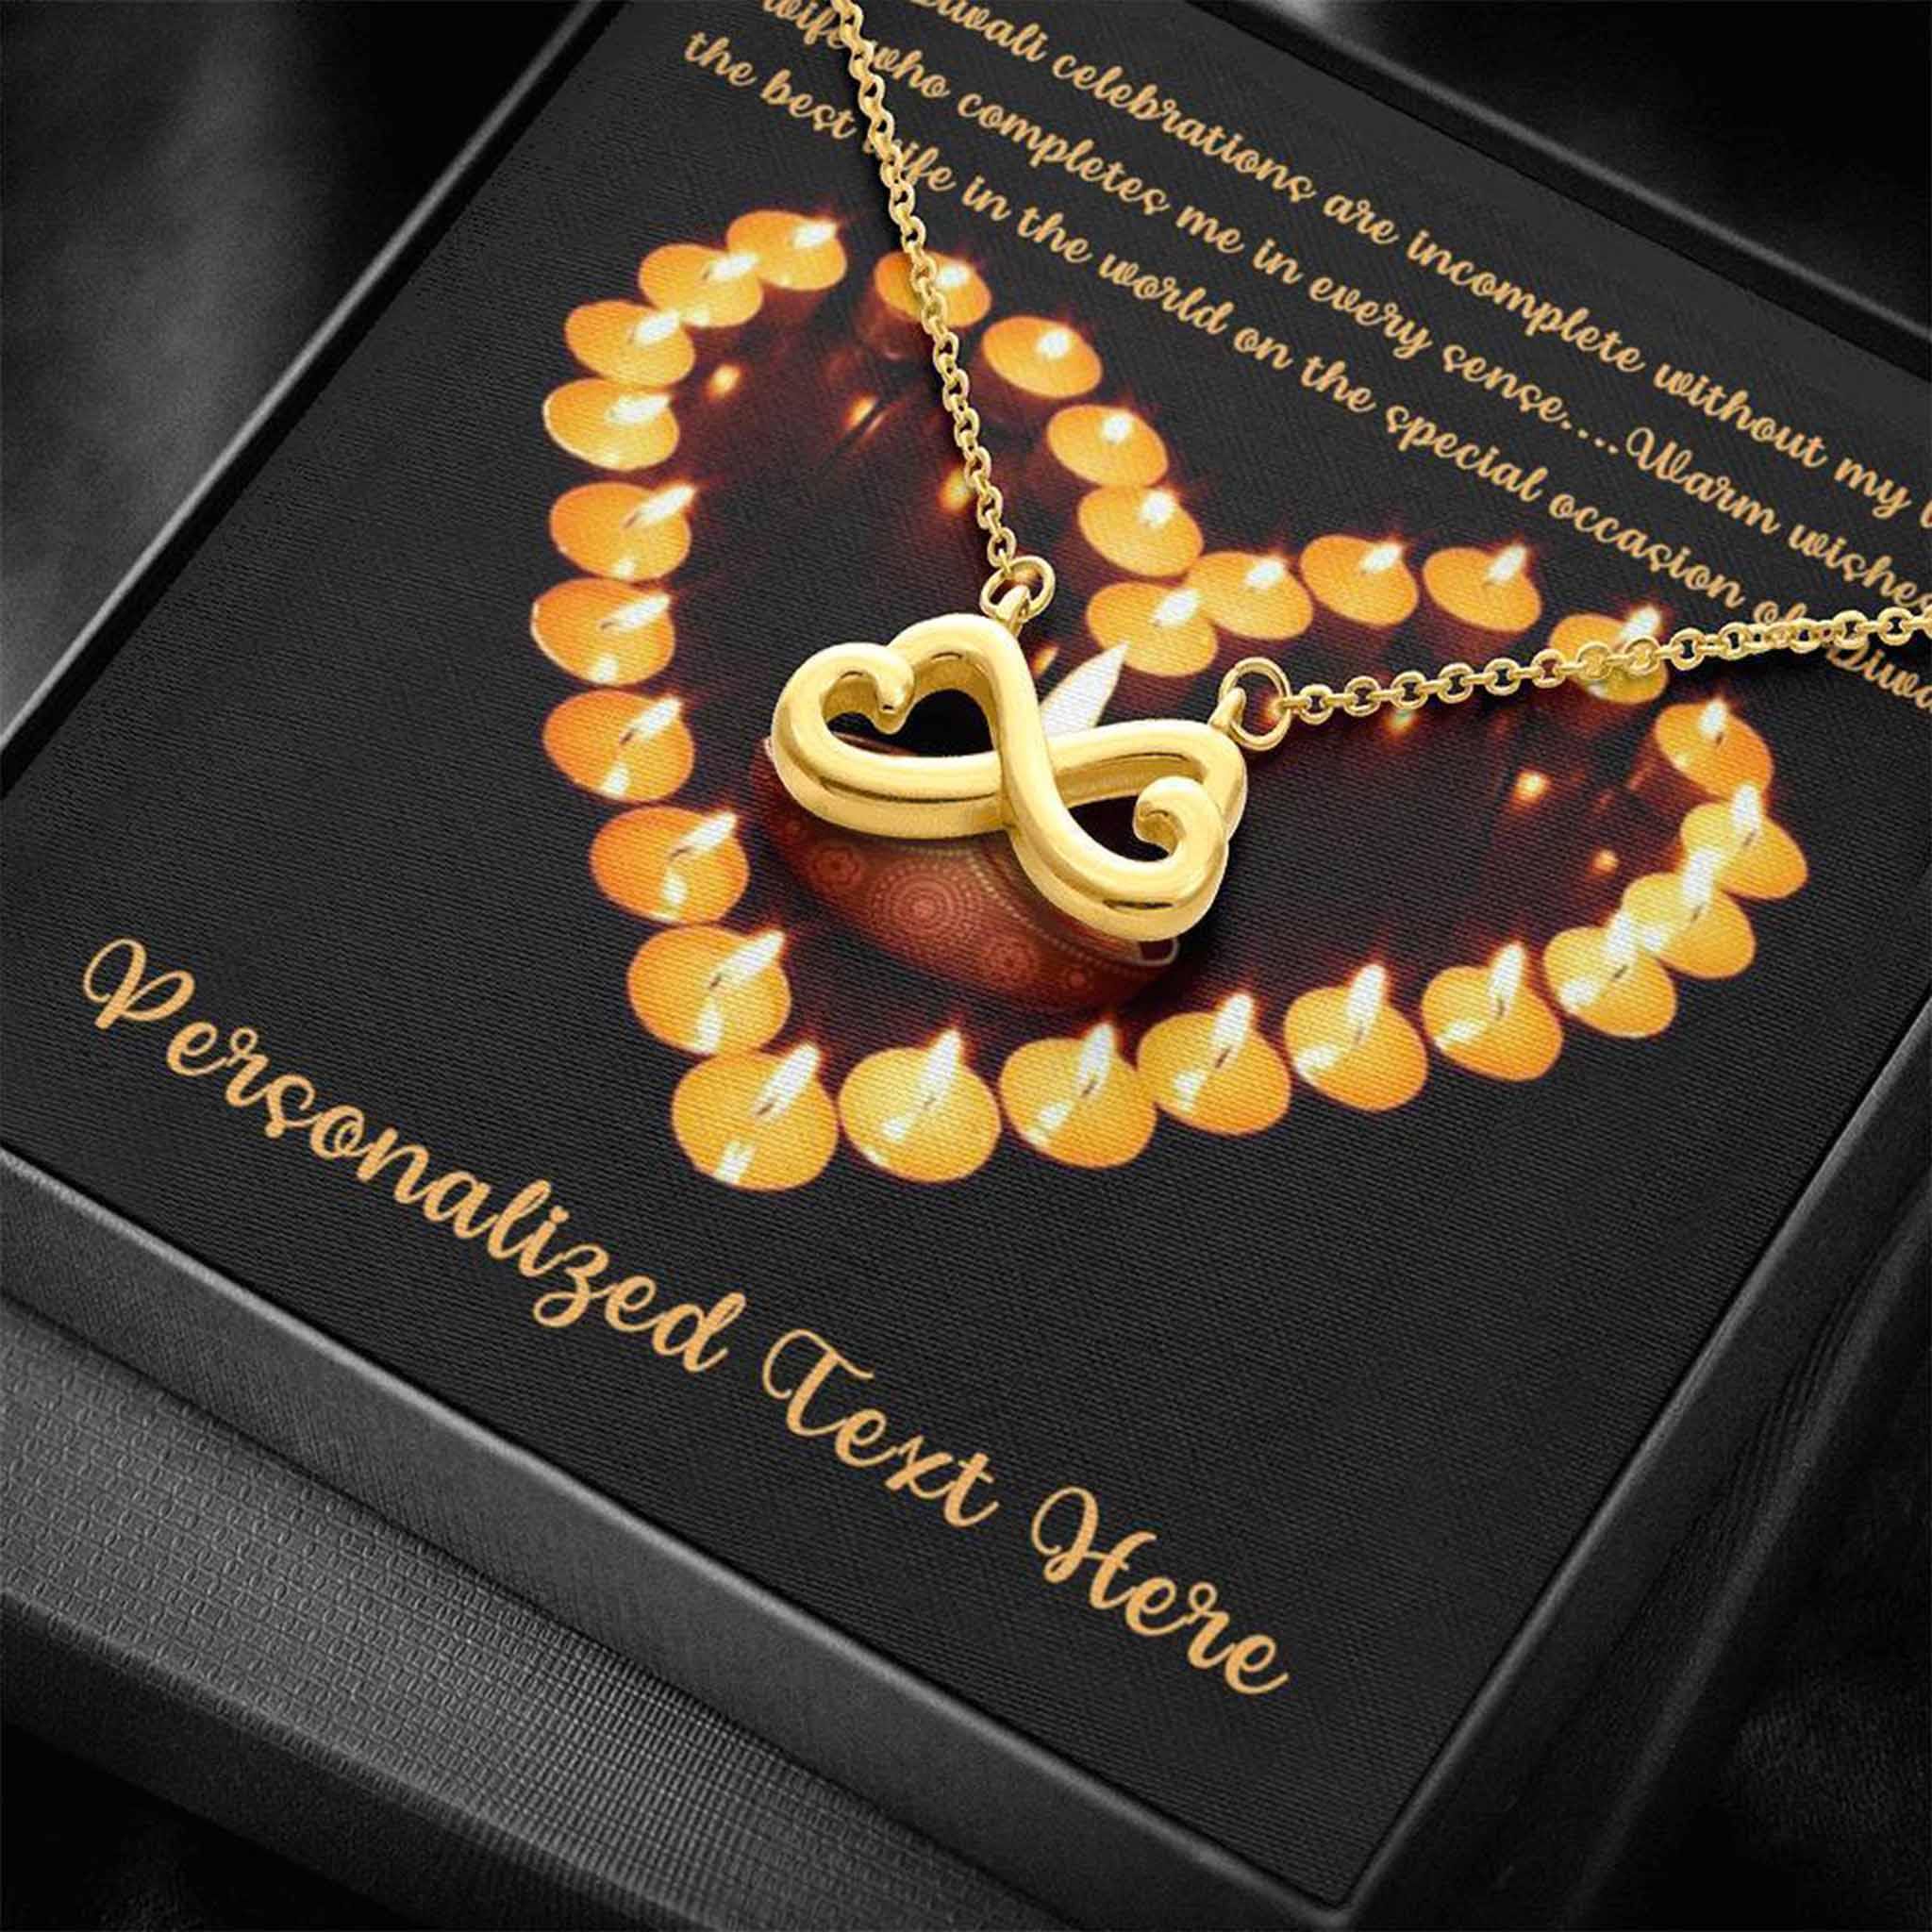 Infinity Hearts Necklace Wife Happy Diwali v4 Personalized Insert CardCustomly Gifts